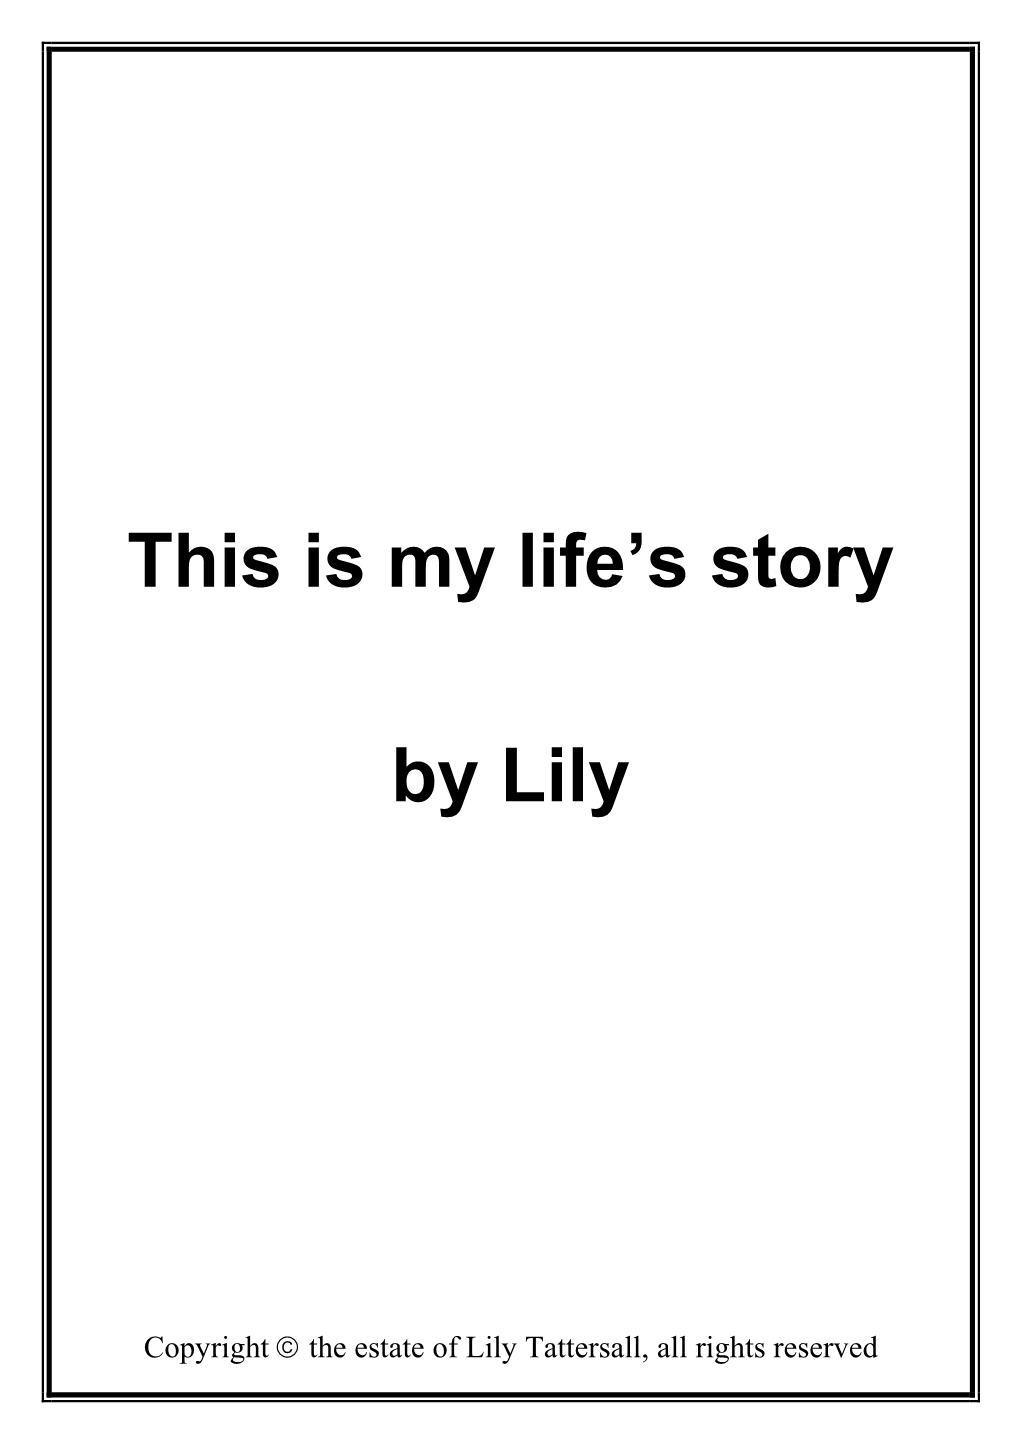 This Is My Life's Story by Lily